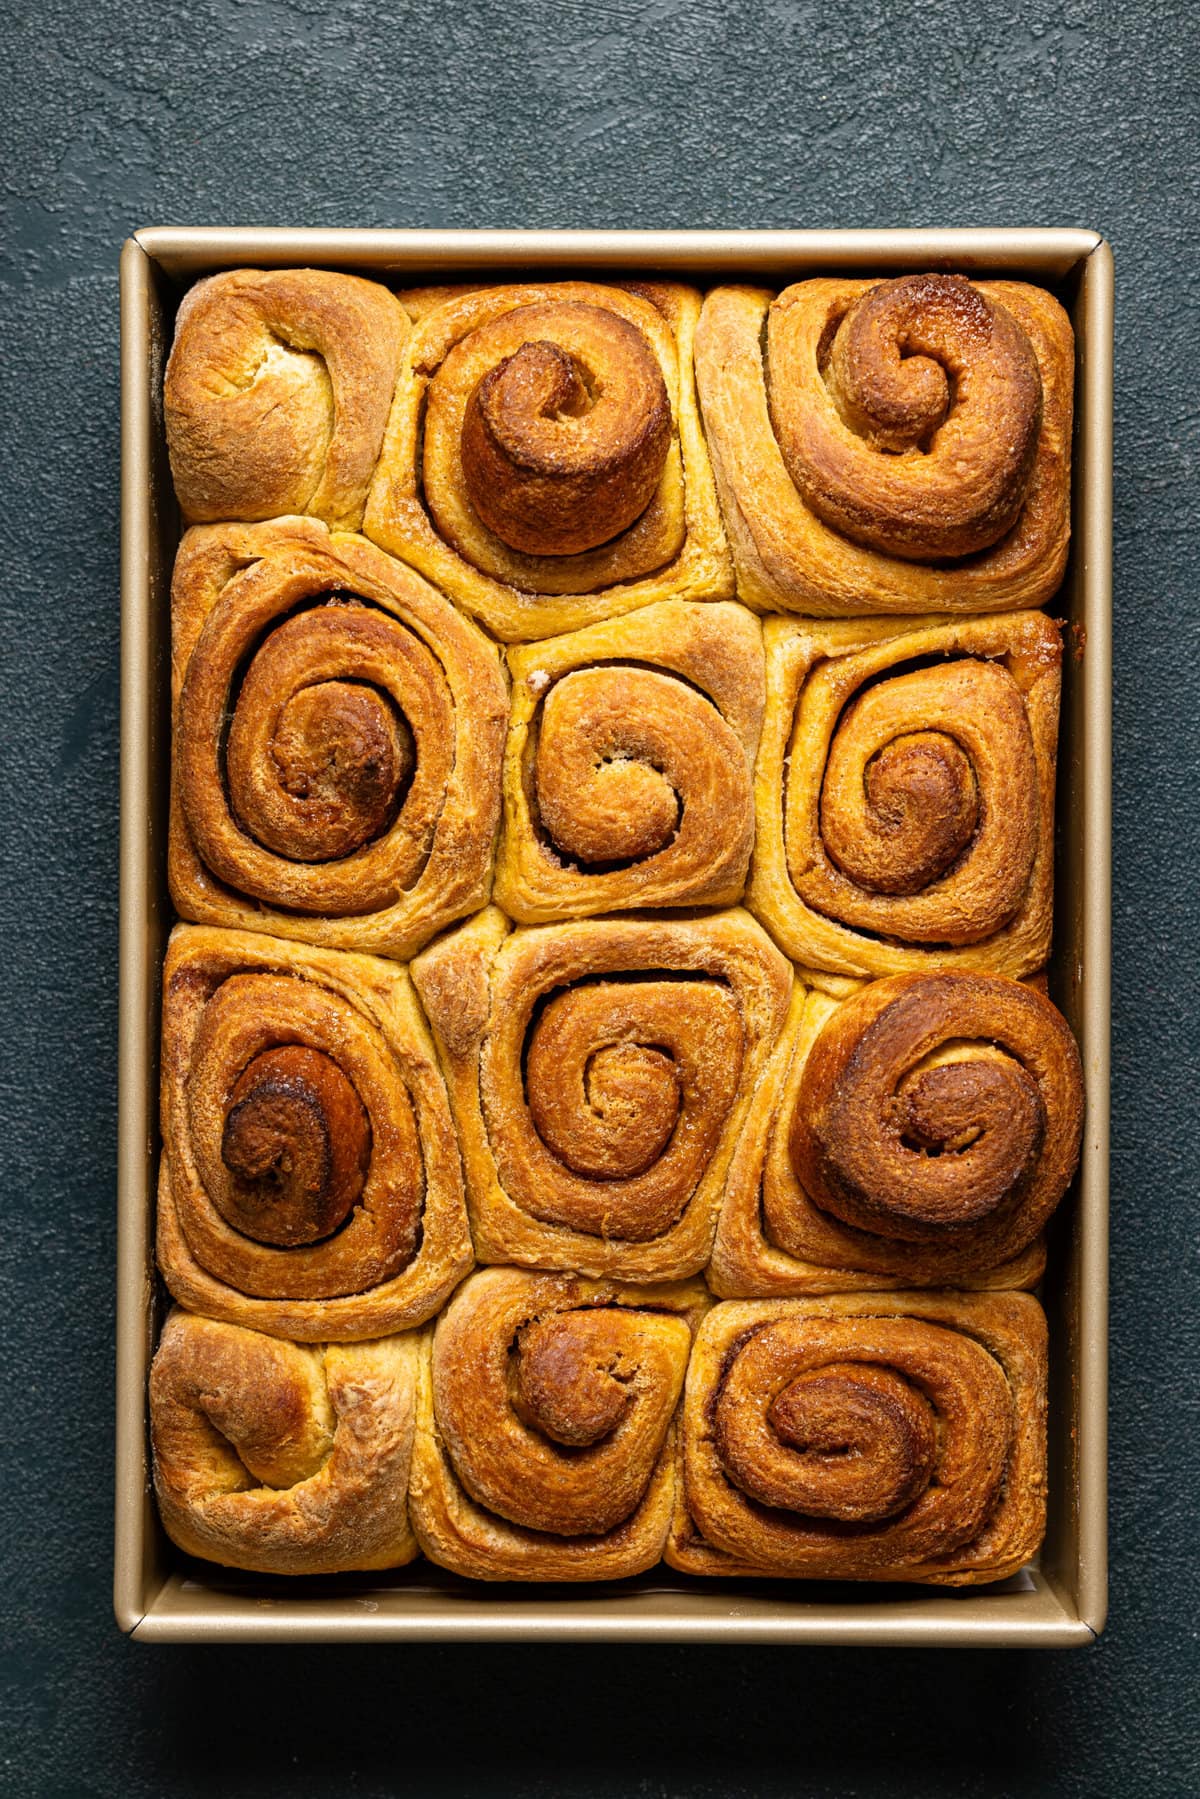 Baked golden brown cinnamon rolls in a baking dish.